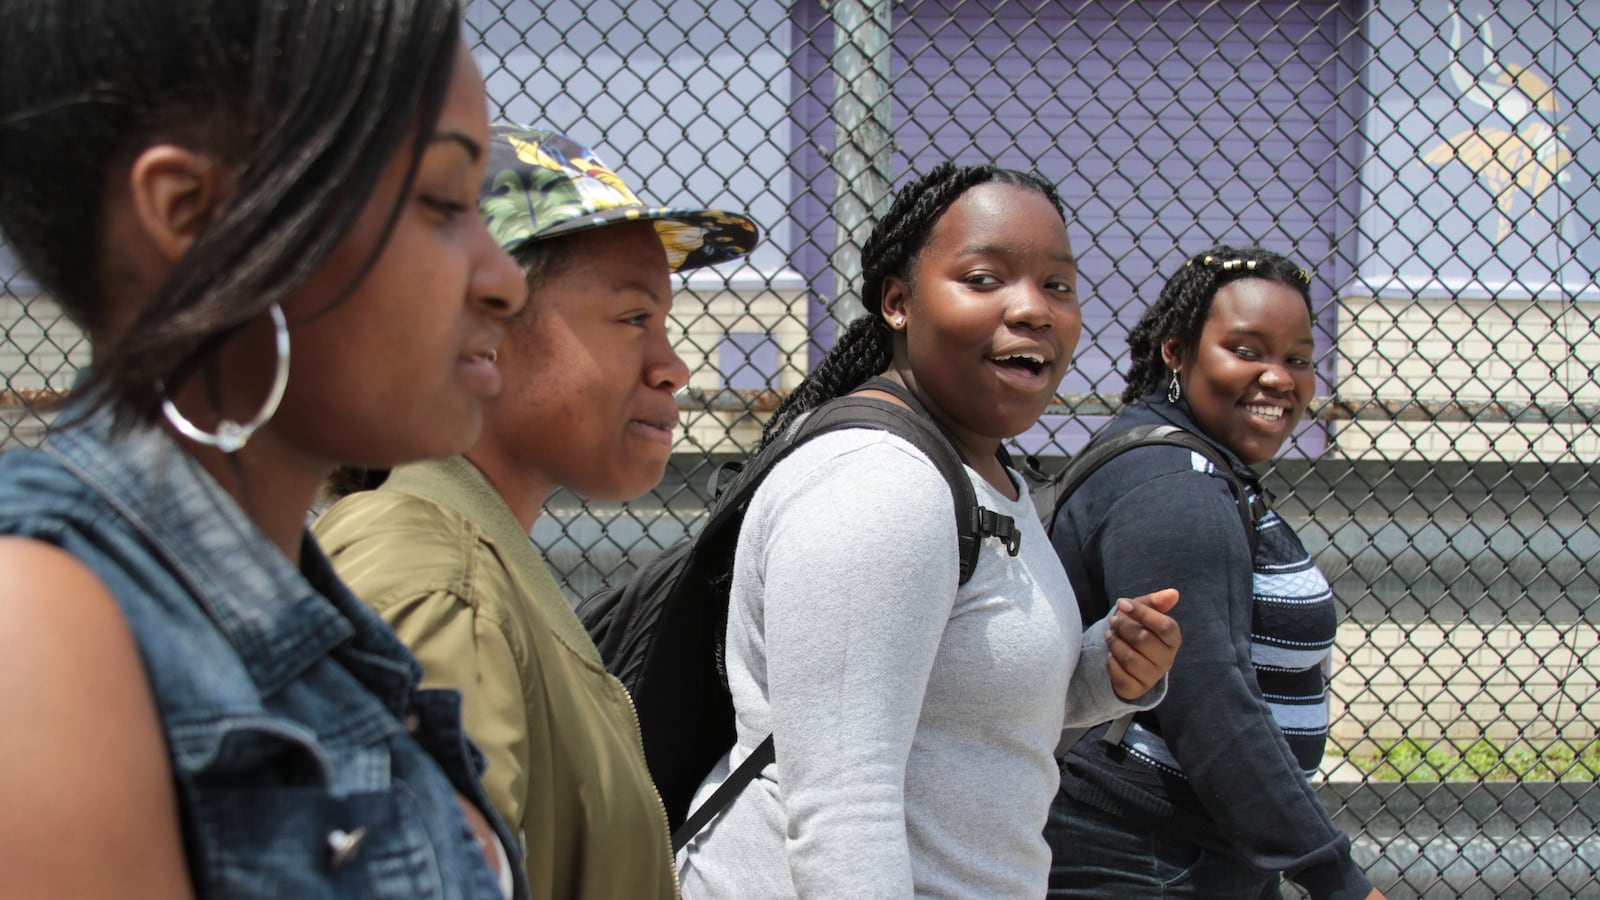 Ismaelle Oriental, 15, (center), and her twin-sister, Elodie, walk with friends after school.